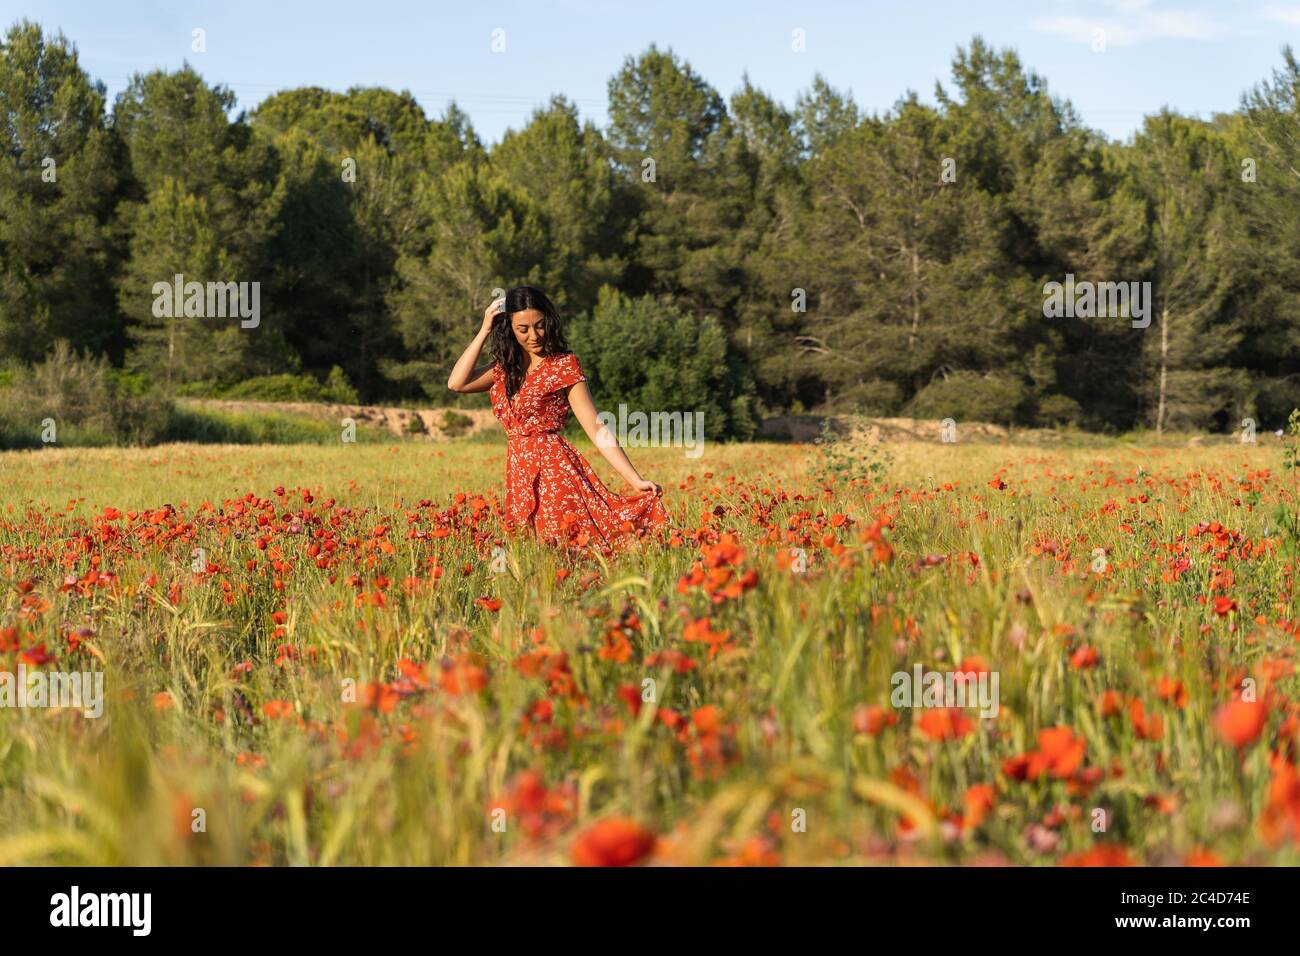 Woman in a red print dress walking with her hand in her hair and holding her dress in a field of red poppies surrounded by a forest Stock Photo